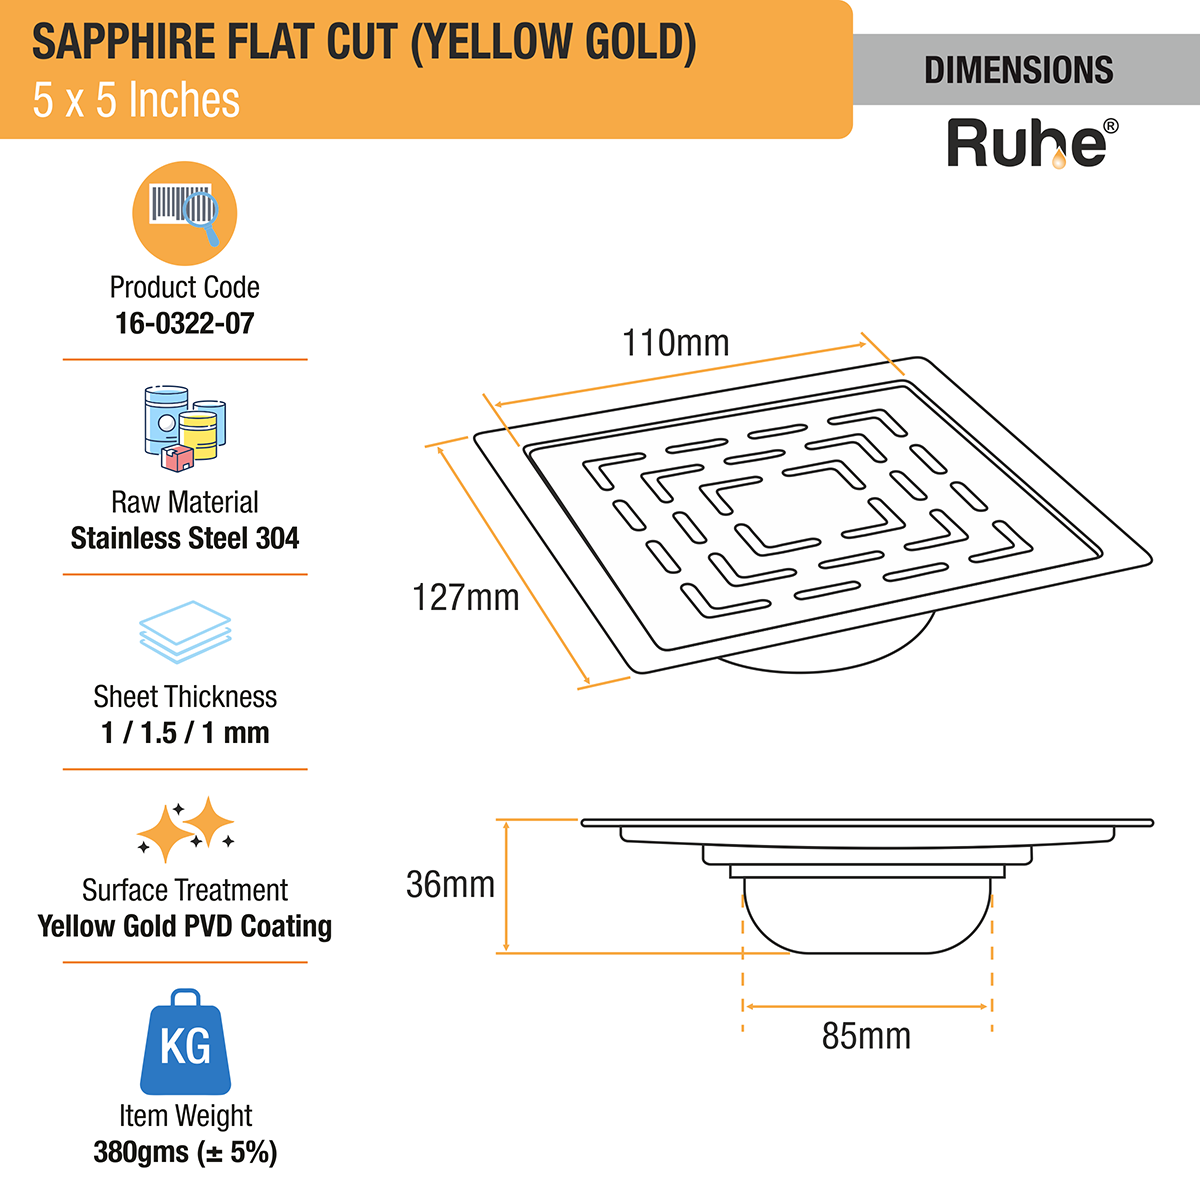 Sapphire Square Flat Cut Floor Drain in Yellow Gold PVD Coating (5 x 5 Inches) dimensions and sizes